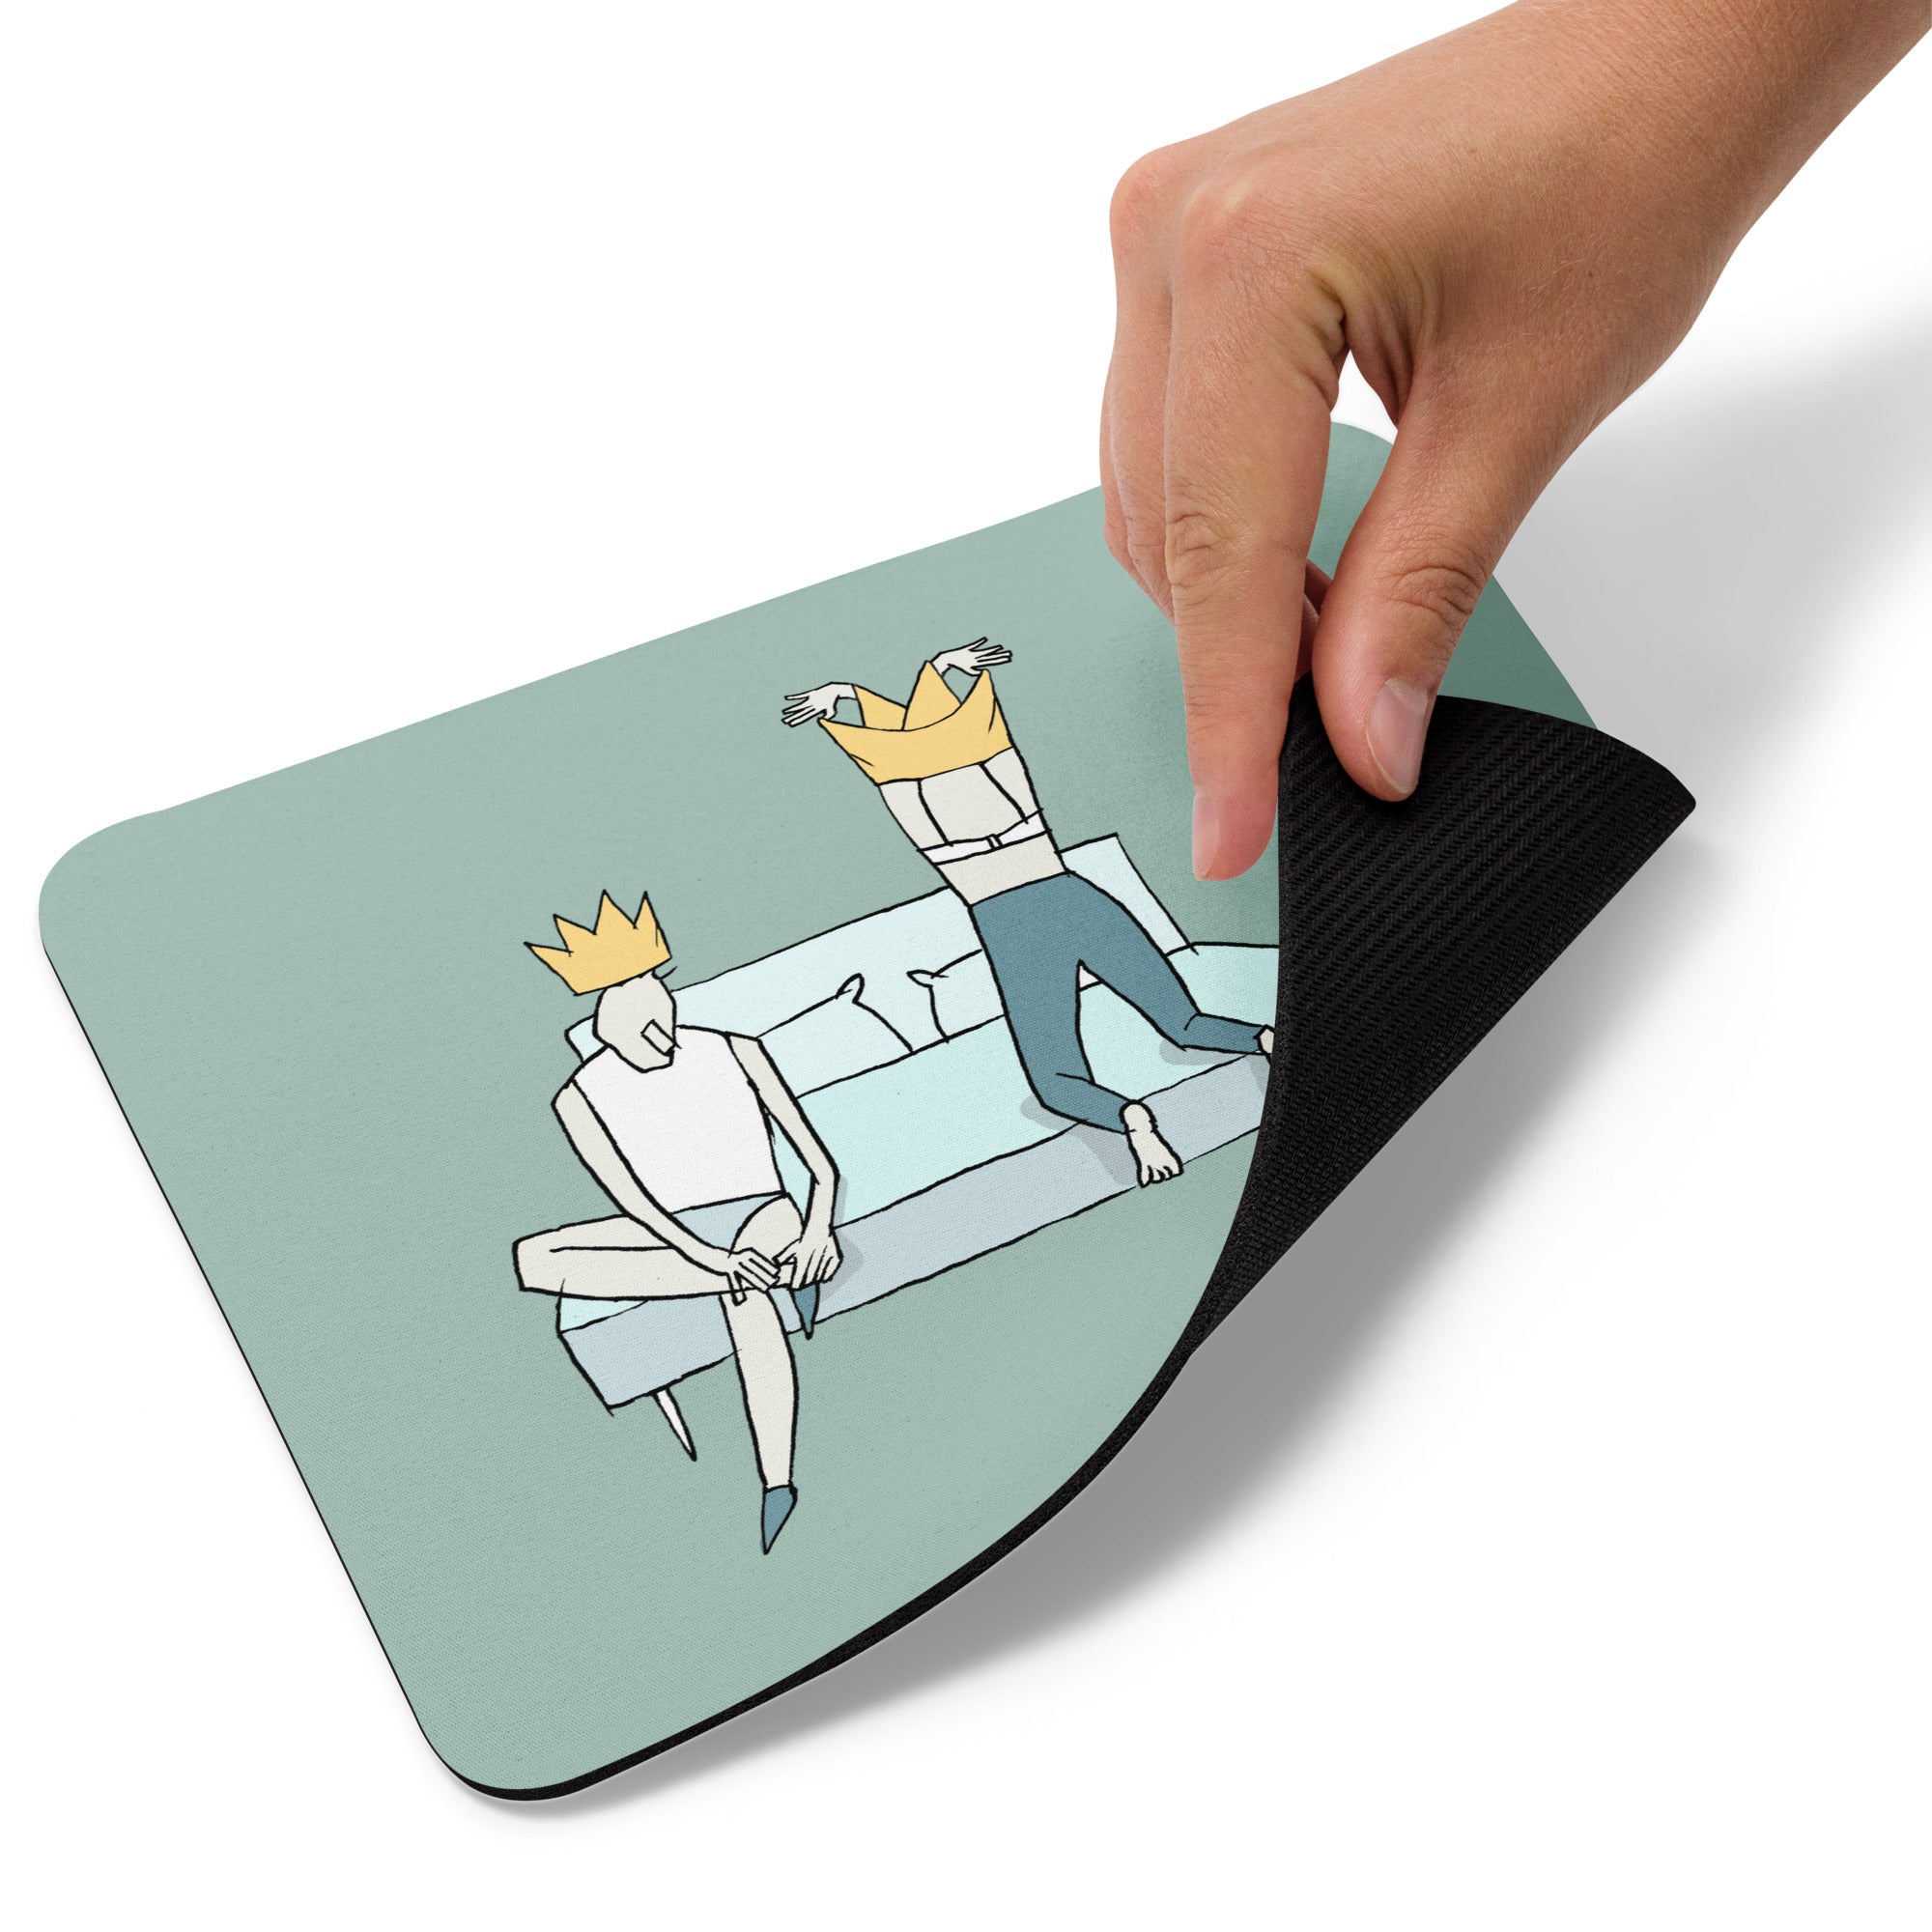 Crown Mouse pad